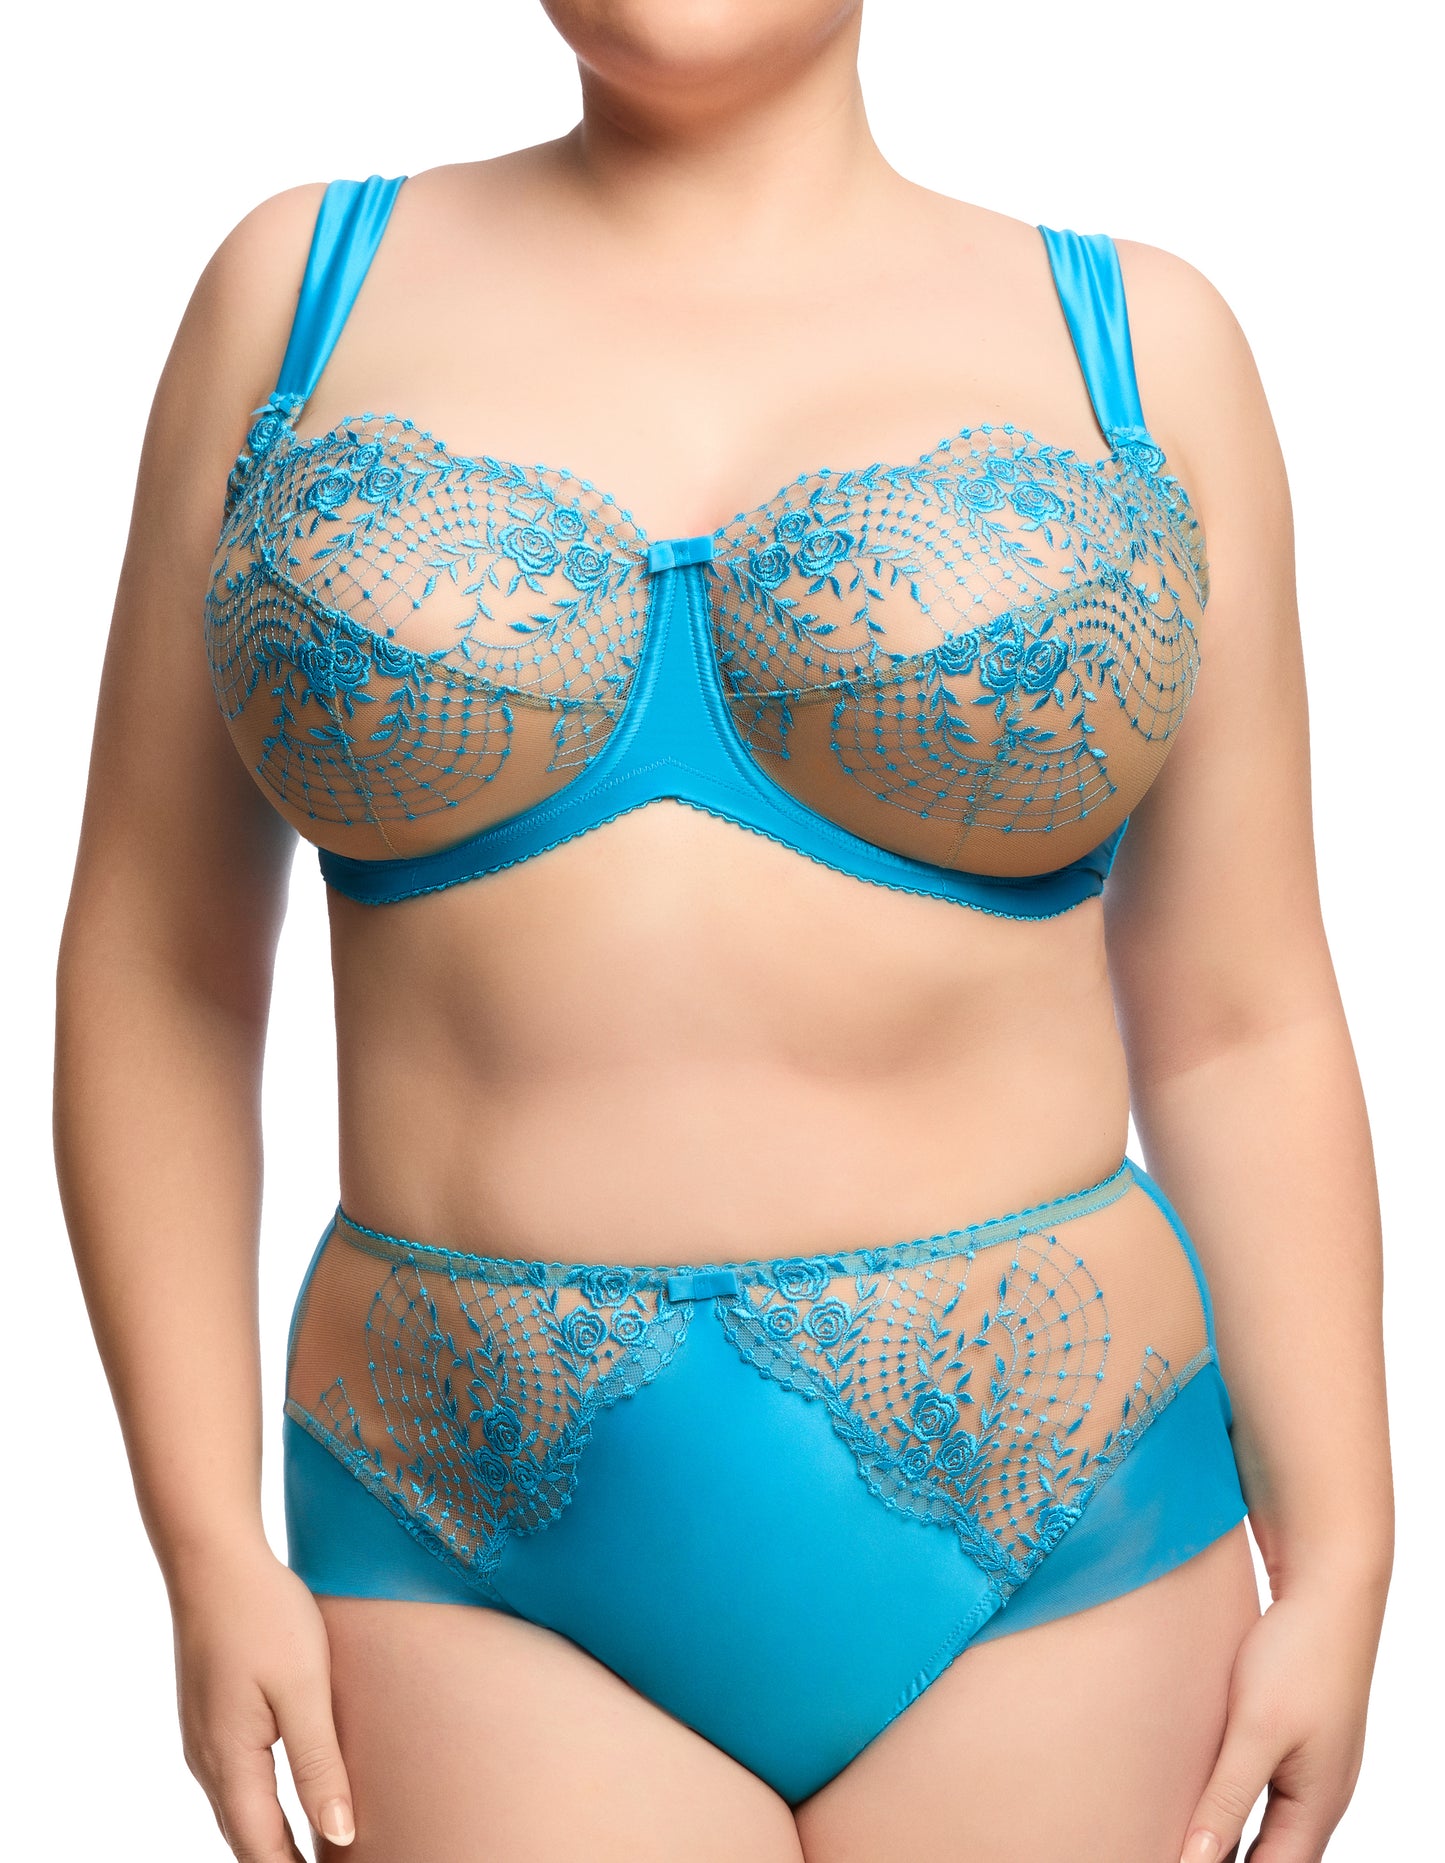 Julie's Roses Curve Bra in Butterfly Blue By Dita Von Teese - 38-44 bands D-G